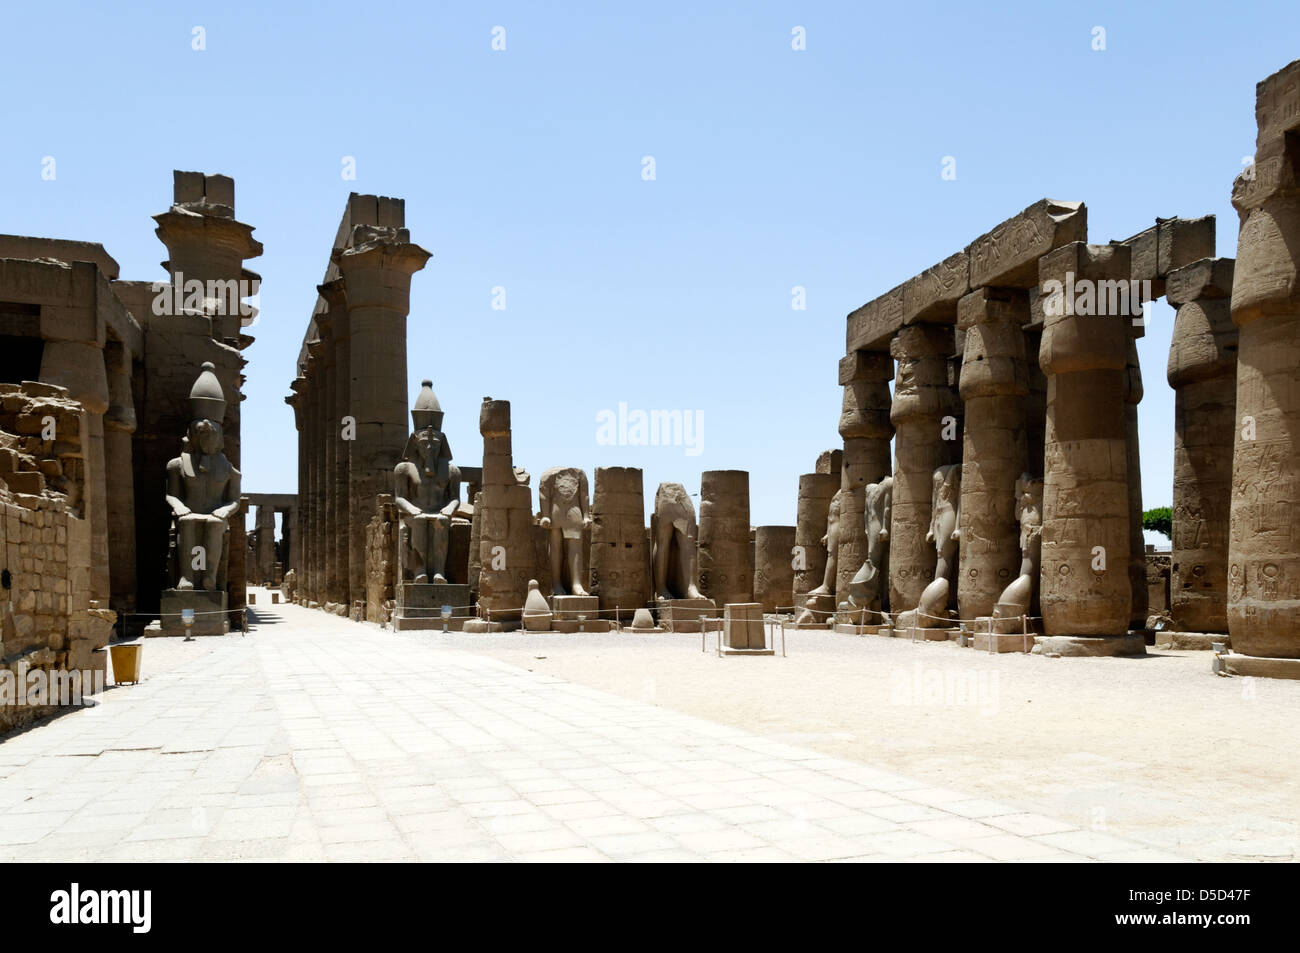 Egypt. Temple of Luxor court of Ramses. Colossal statues of Rameses II at the entrance of the Great Colonnade of Amenhotep III. Stock Photo